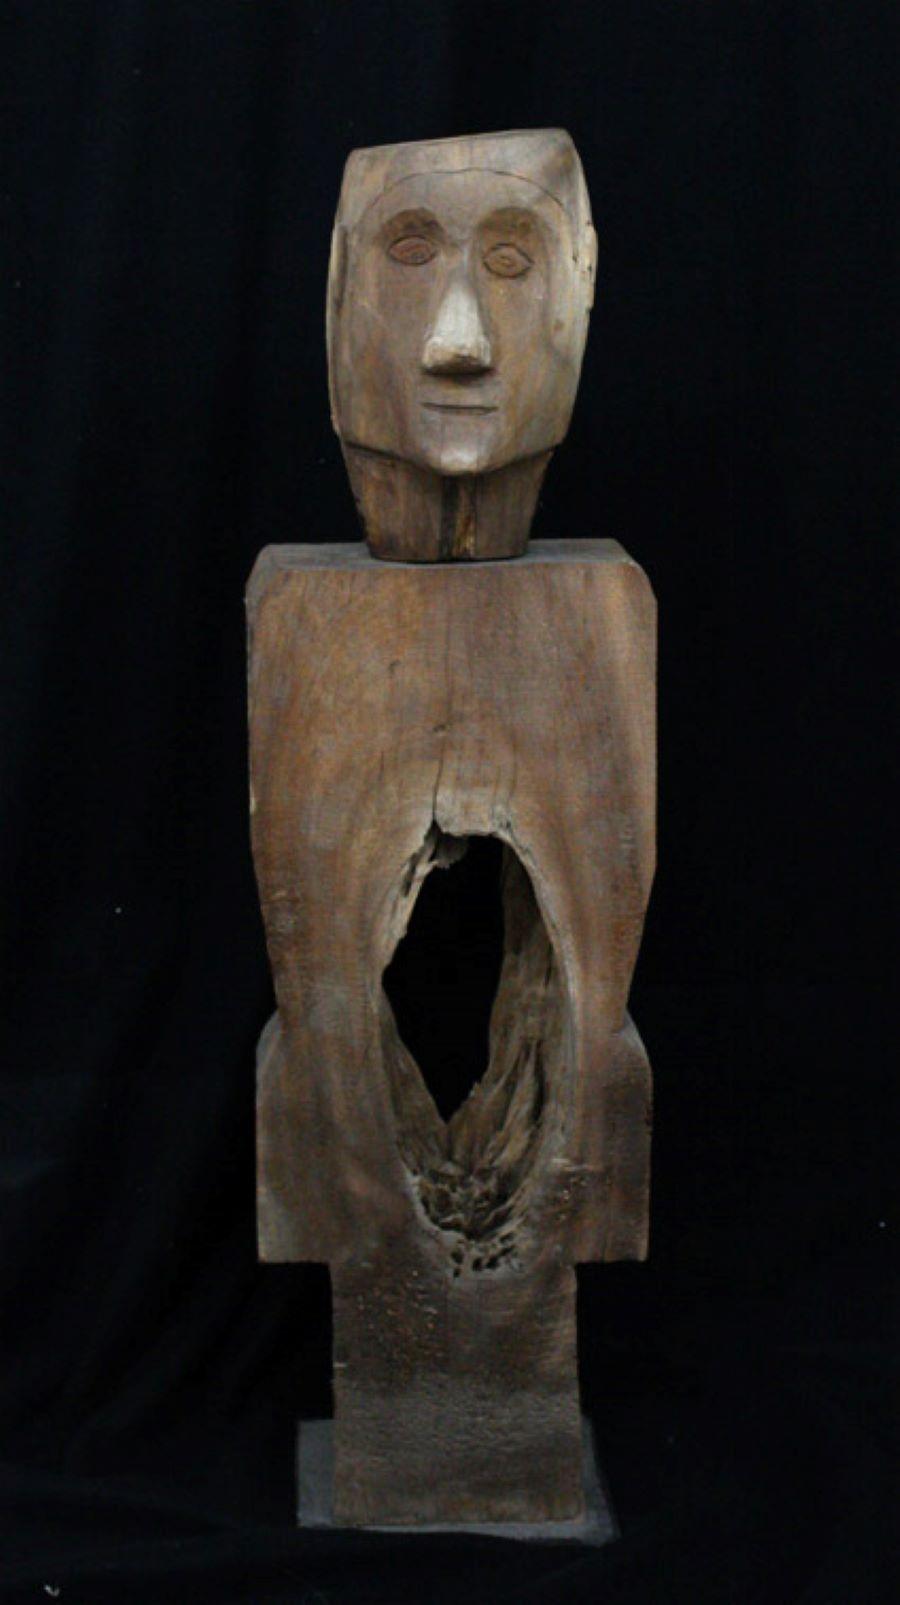 Unknown Figurative Sculpture - "Wooden Man" Freestanding Wood Sculpture with Metal Base 